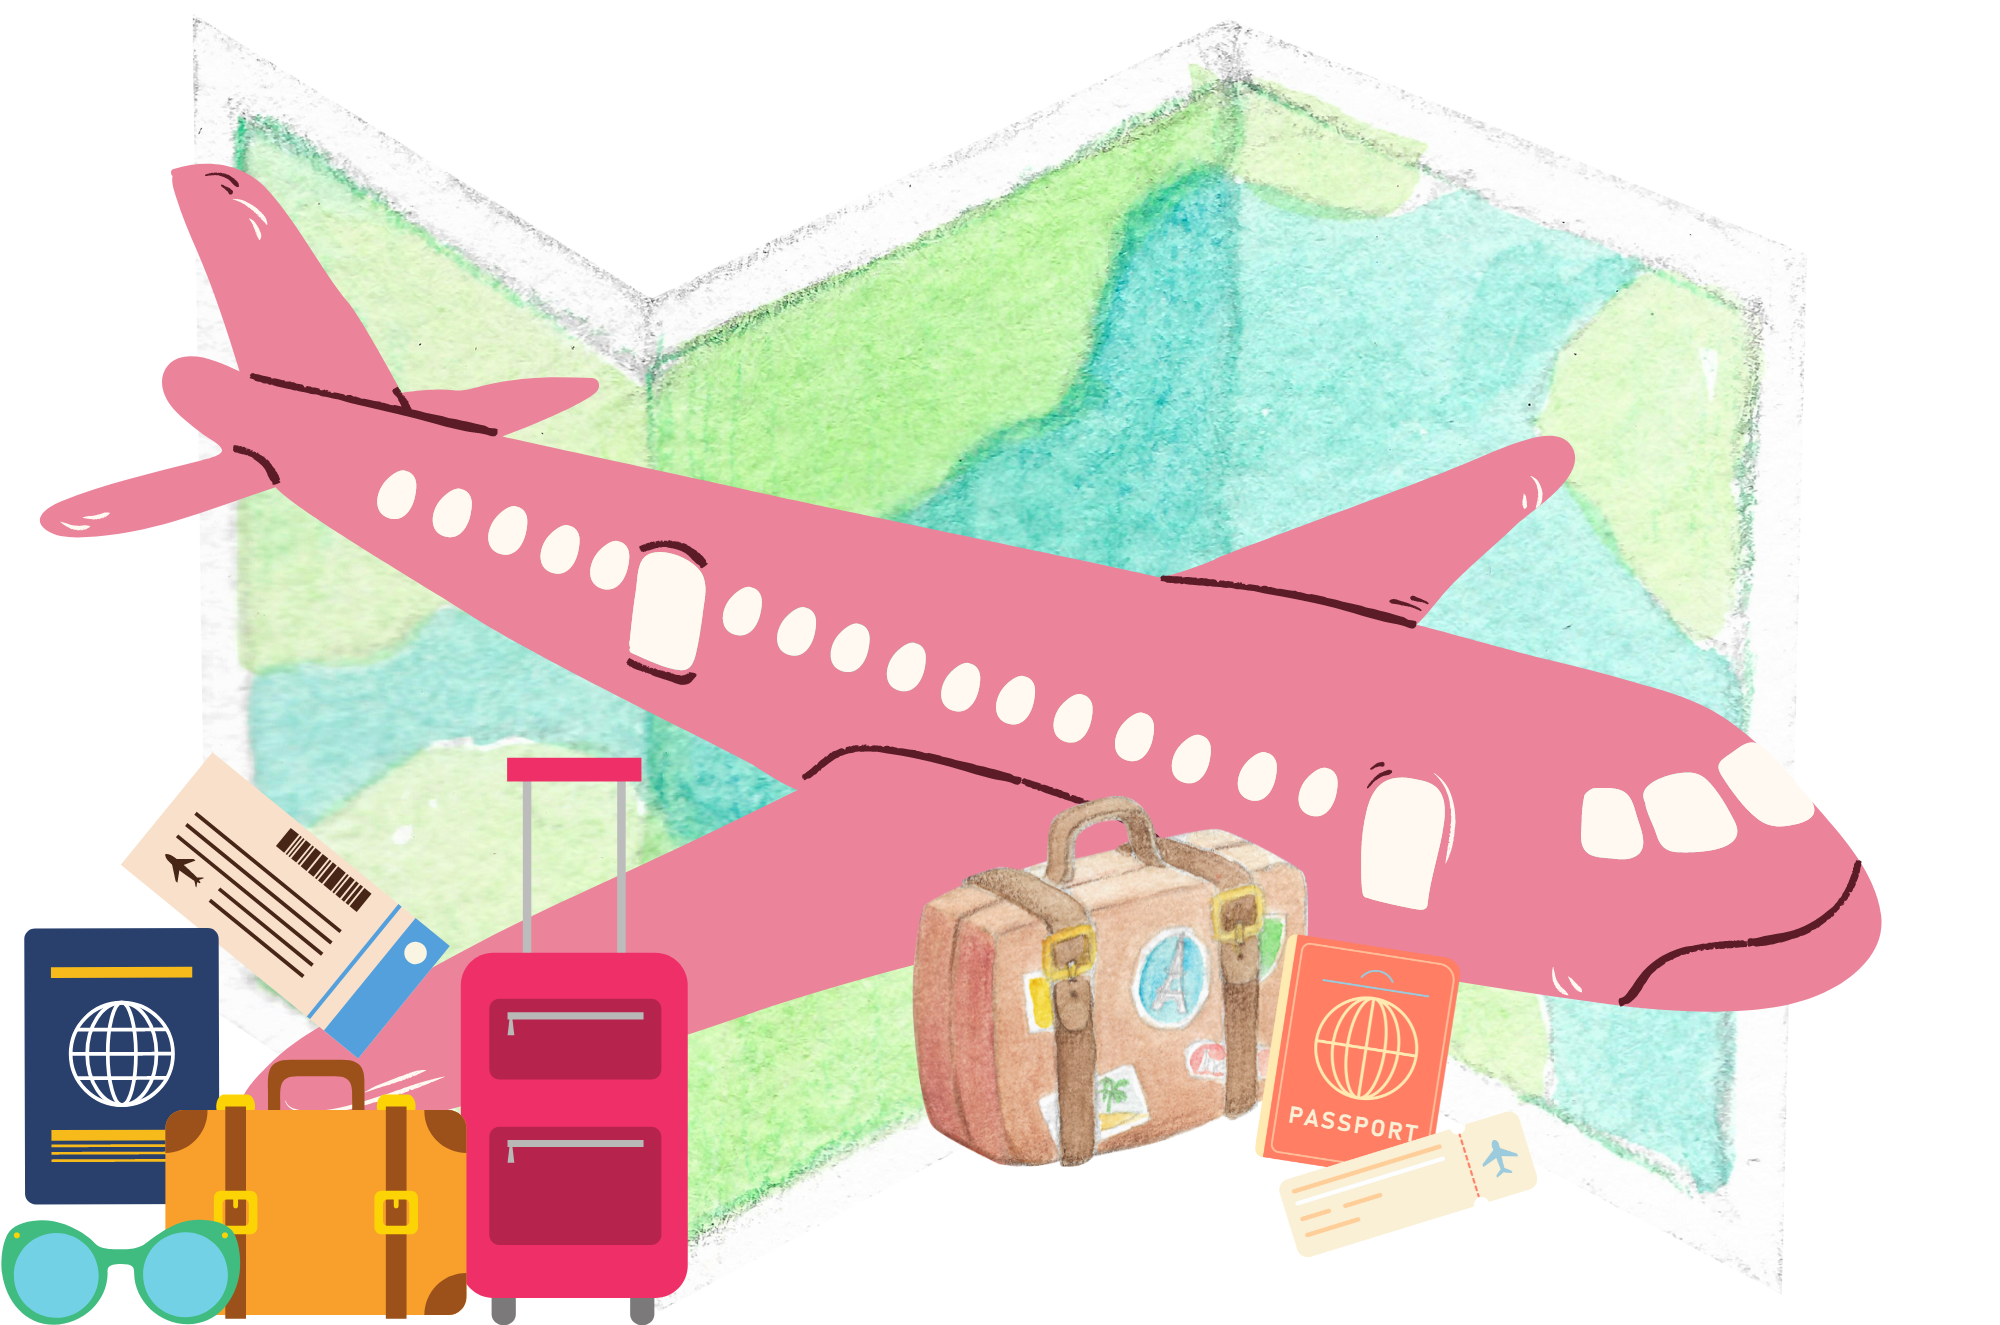 Image of an airplane and travel items for the Hacking Travel Anxiety article